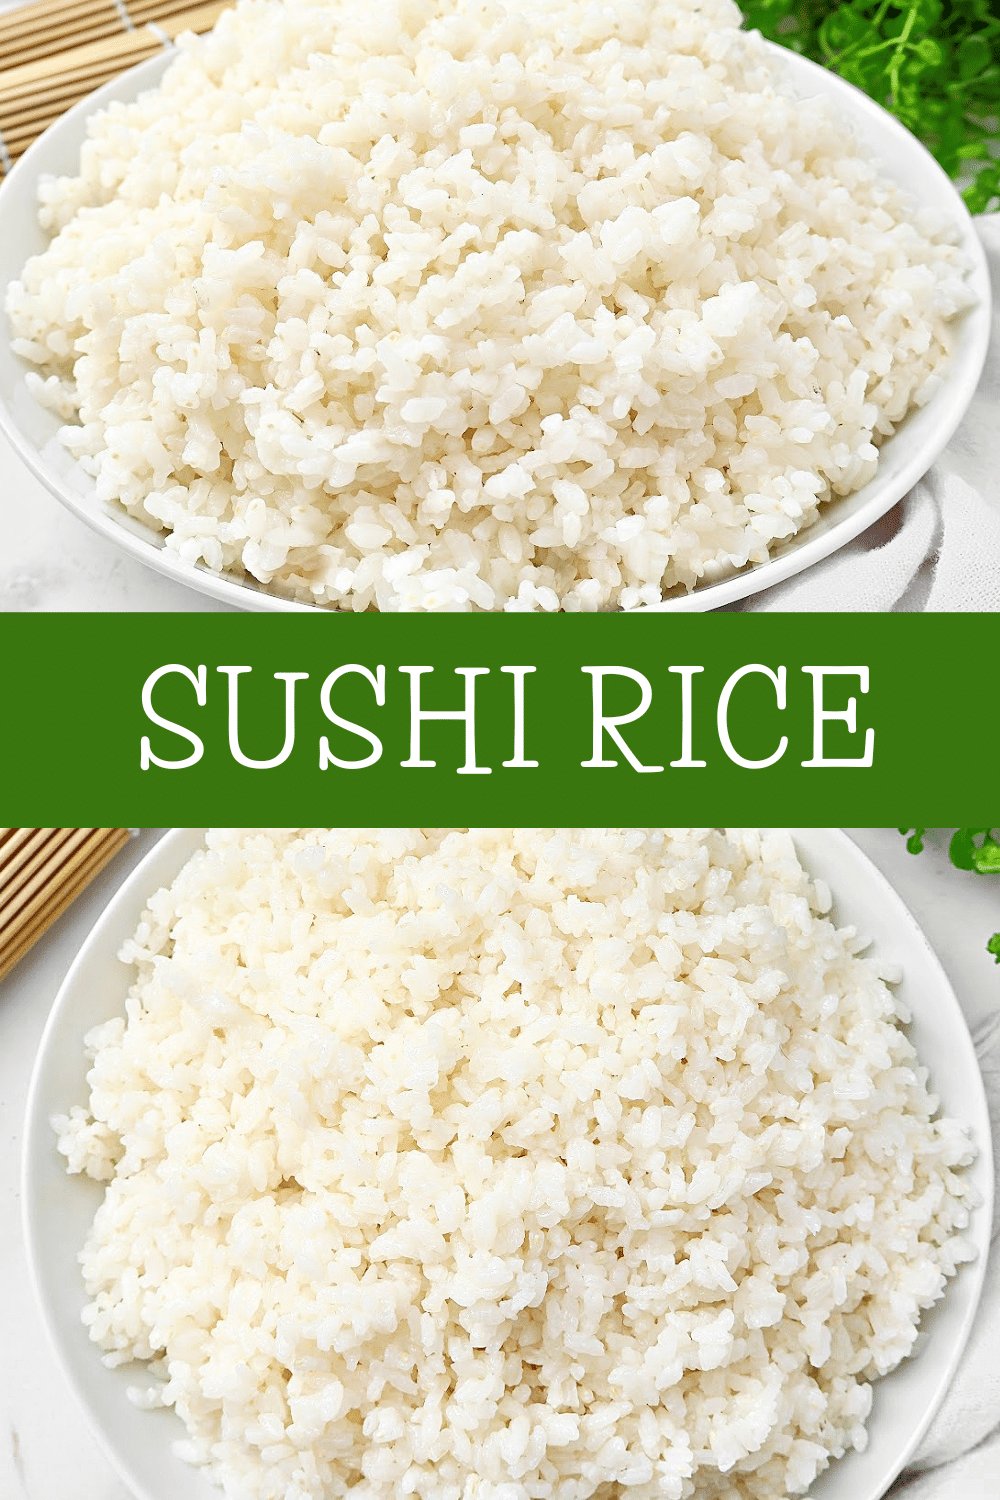 Sushi Rice ~ Restaurant-quality sticky rice is easy to make with simple ingredients. Perfect for homemade sushi!  via @thiswifecooks